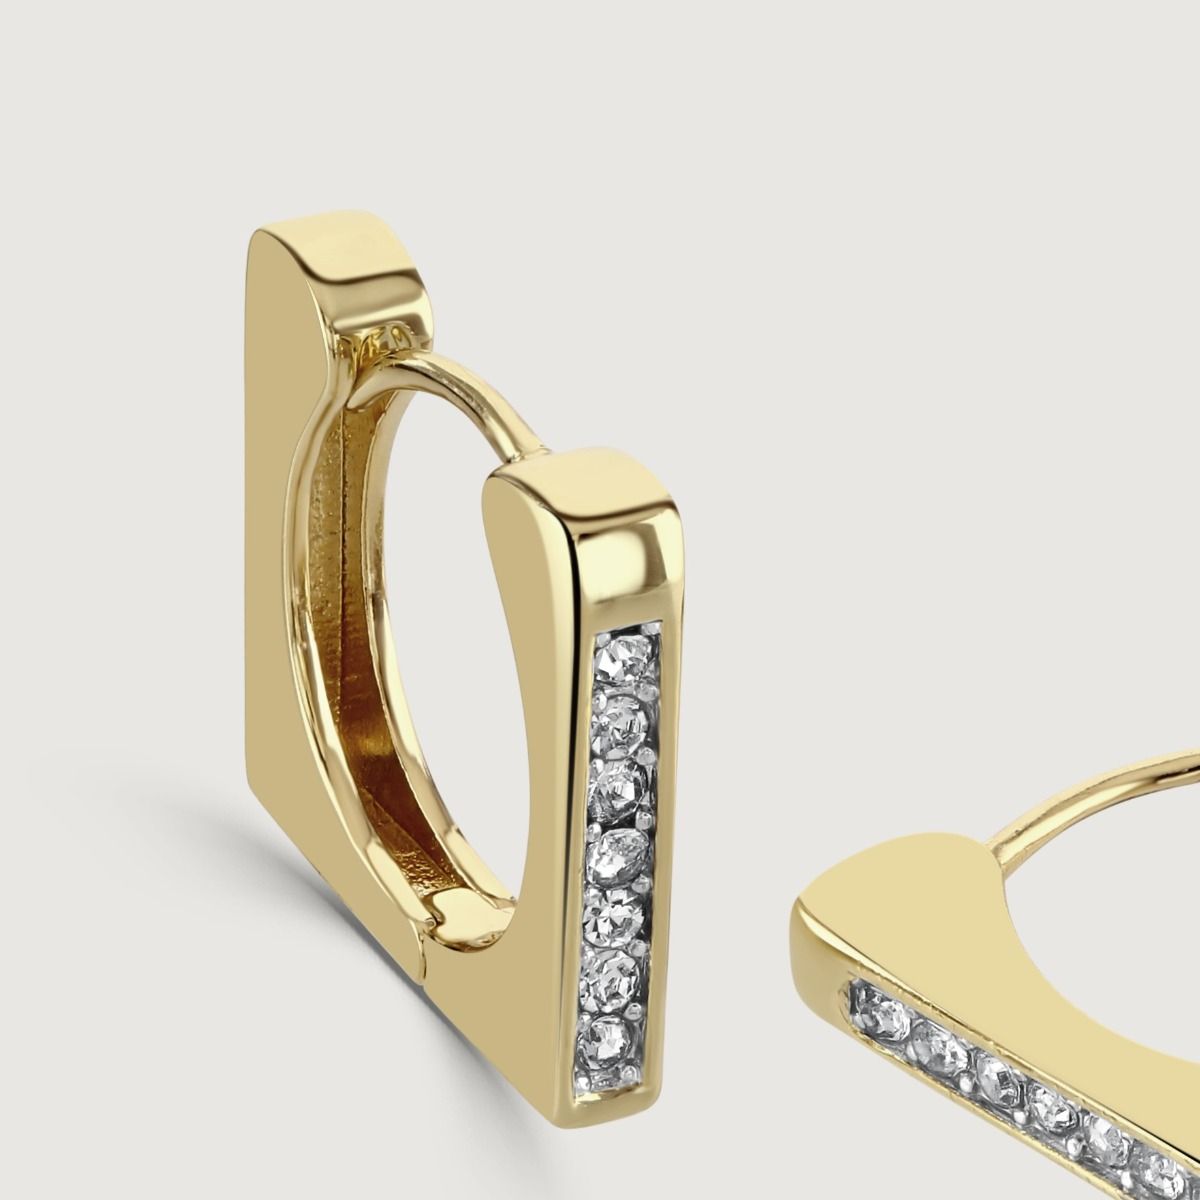 The Square Crystal Huggie Earrings are dazzling accessories that effortlessly combine elegance and sparkle. With their square shape and embedded crystals, these huggie earrings exude a sophisticated charm. 